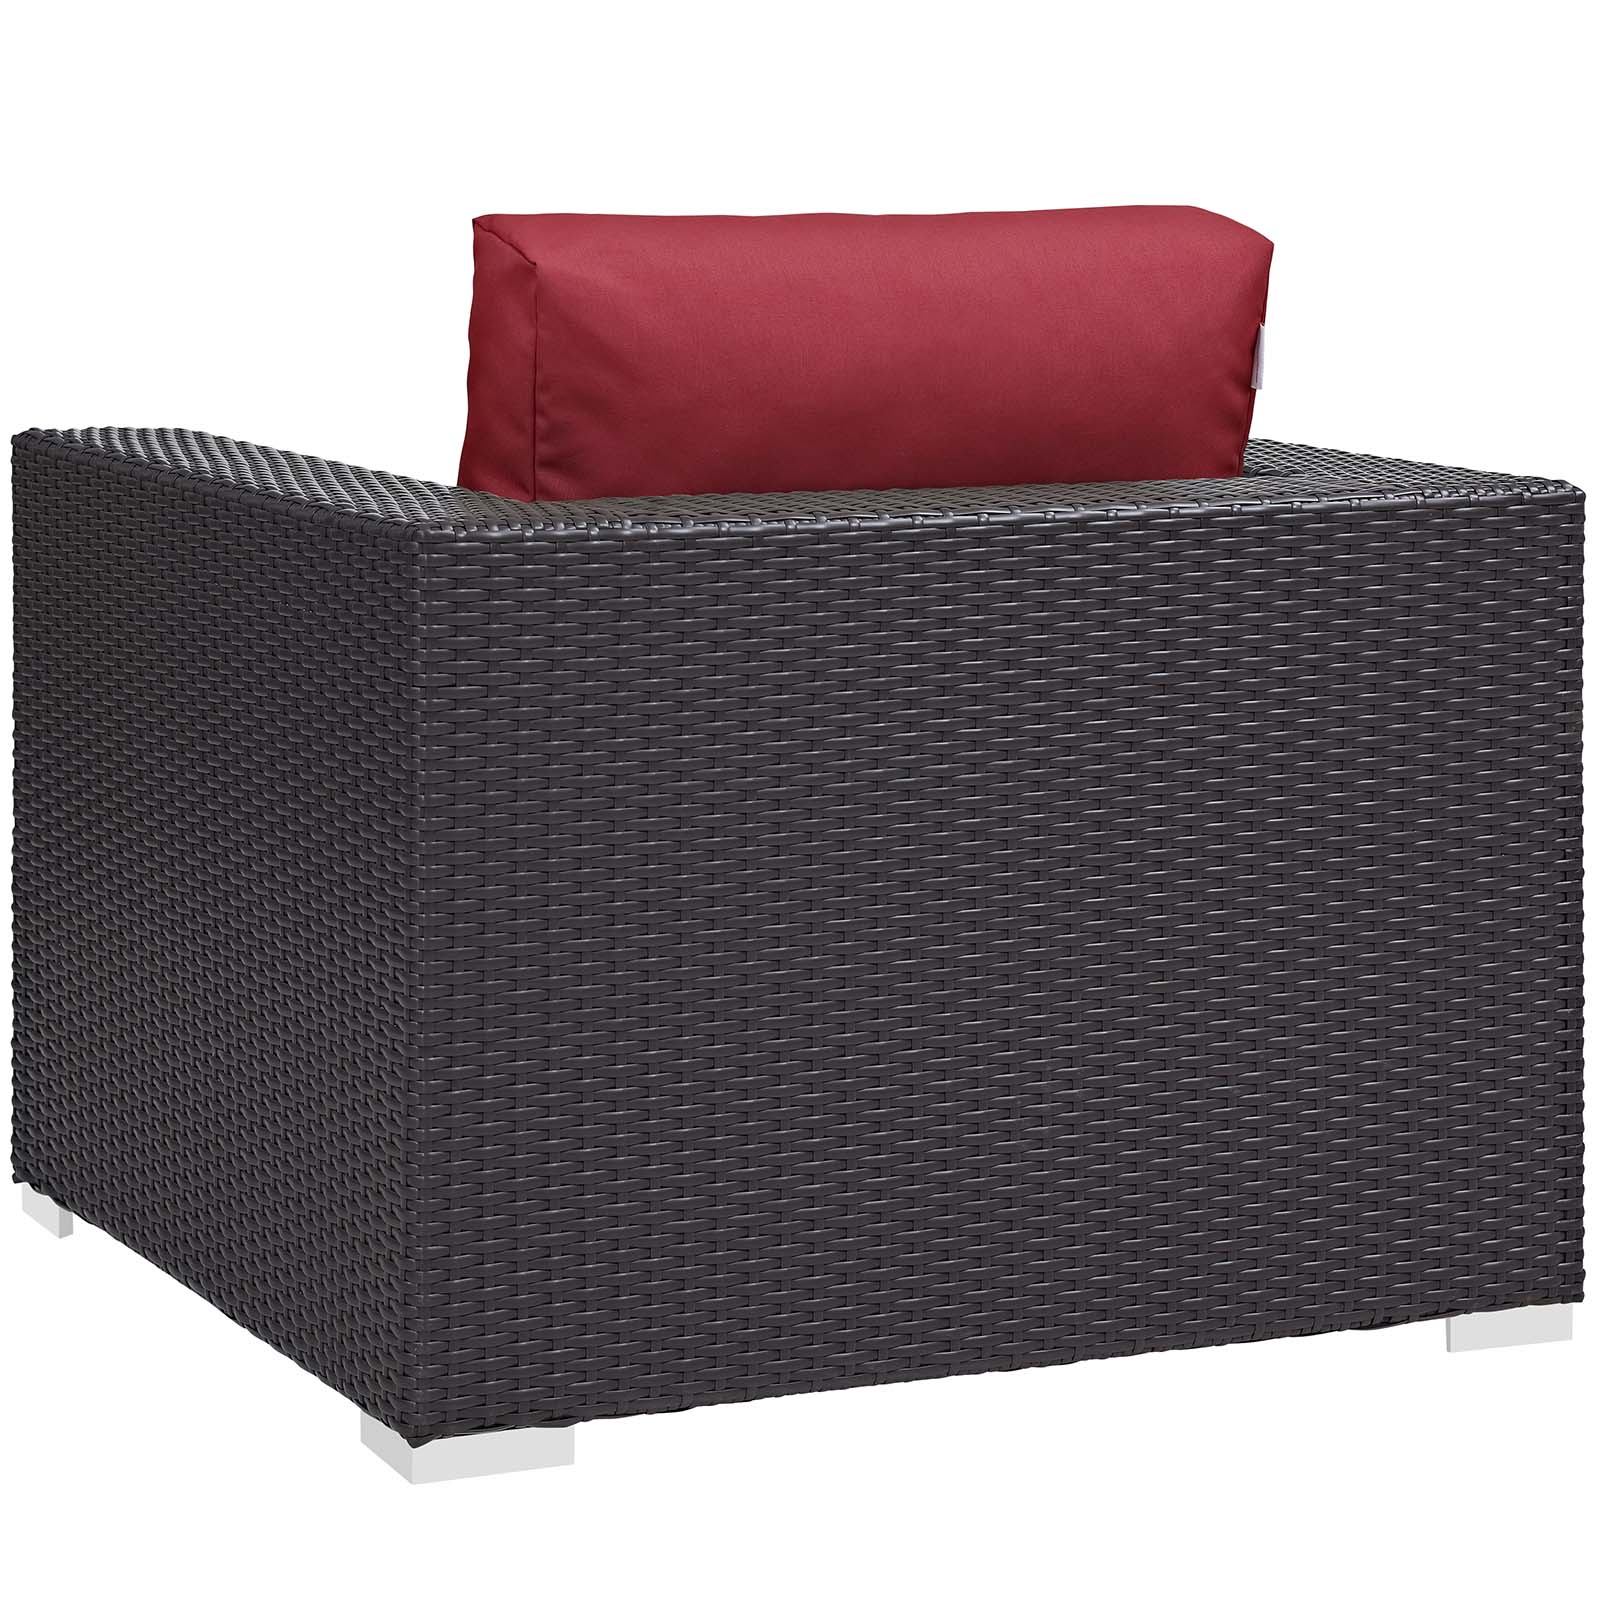 Contemporary Modern Urban Designer Outdoor Patio Balcony Garden Furniture Lounge Chair and Table Fire Pit Set, Fabric Rattan Wicker, Red - image 3 of 8